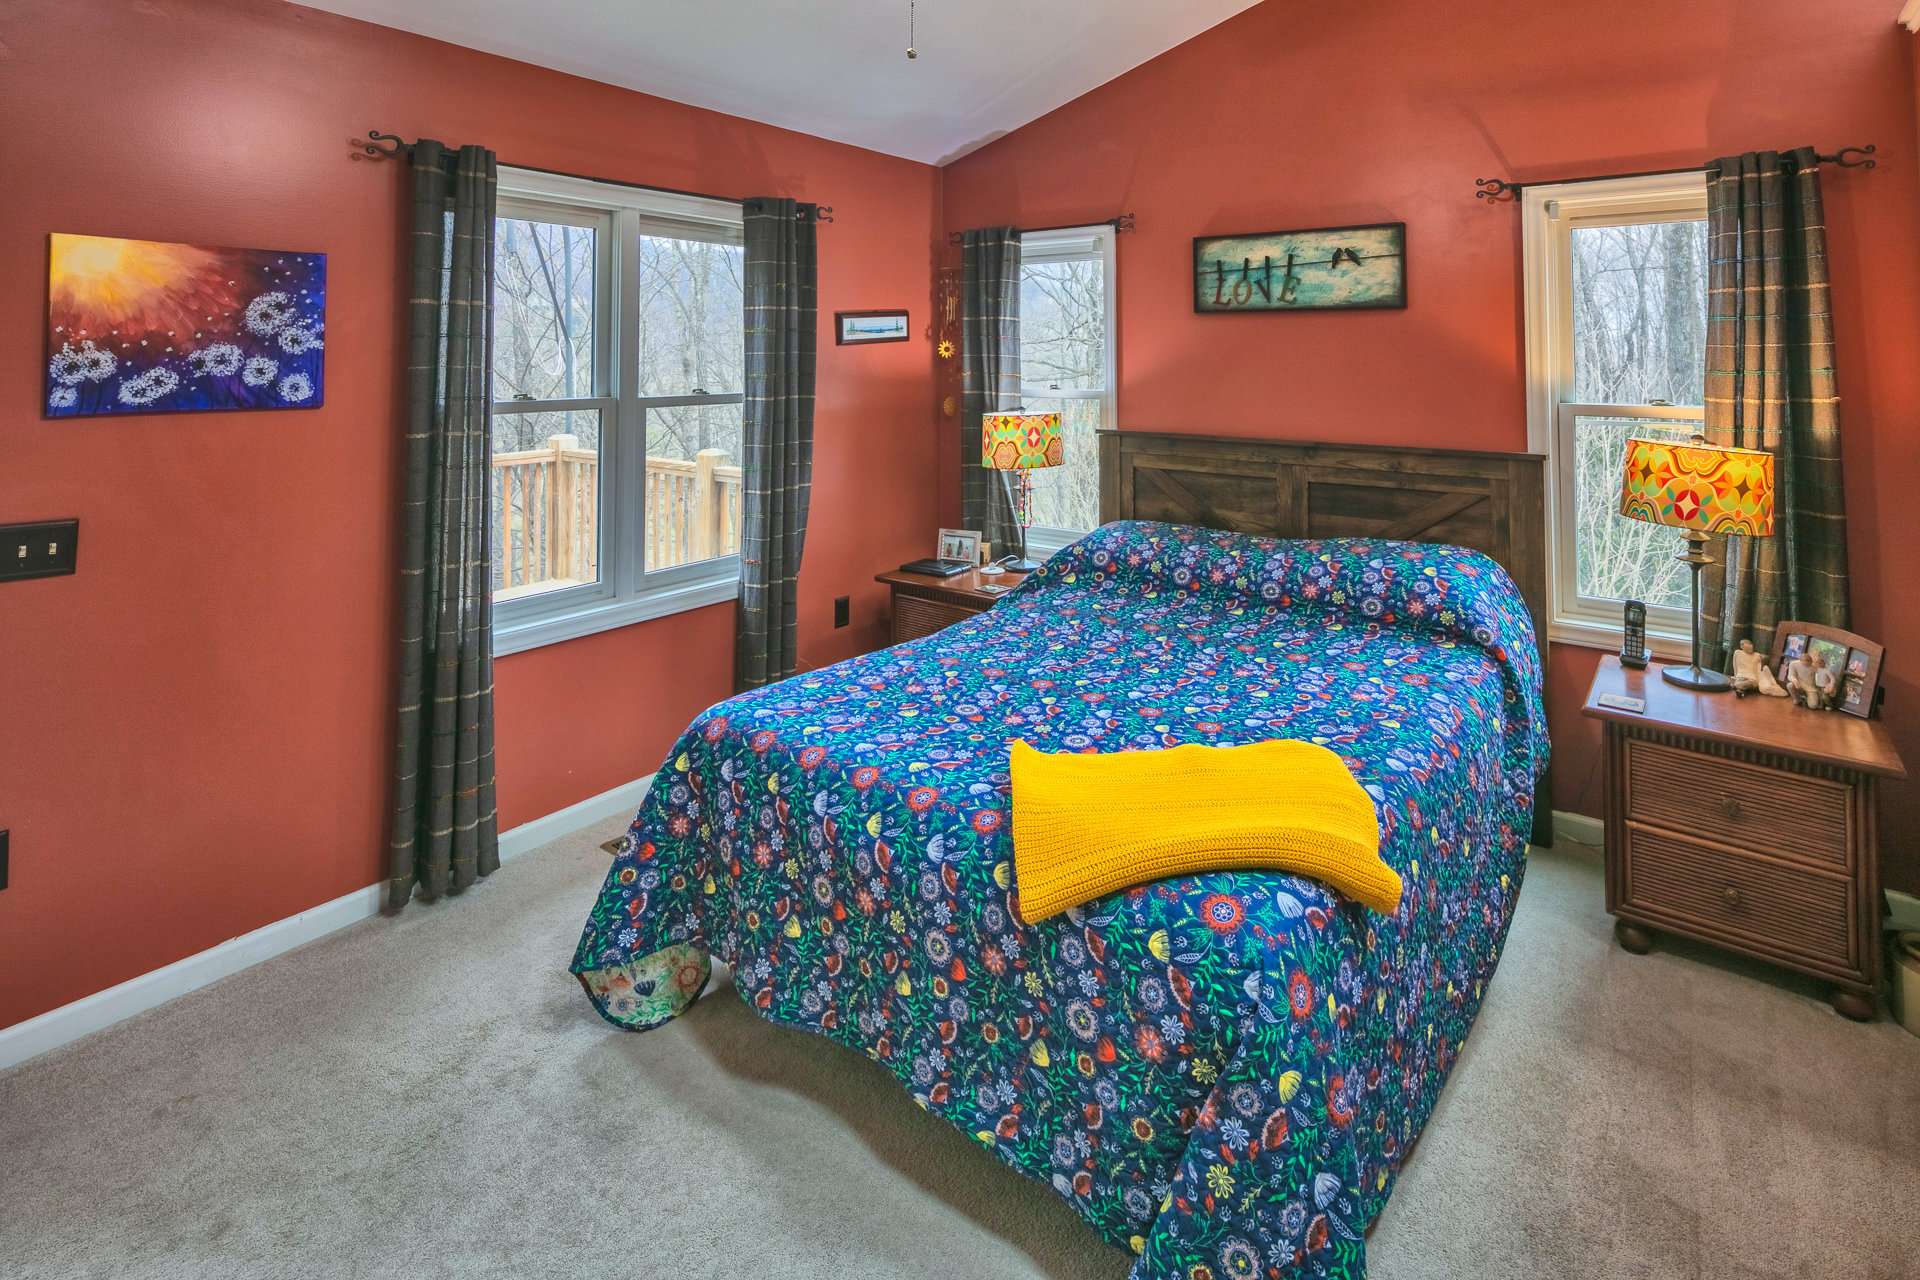 Conveniently located on the main level, the master suite offers a private bath and private access to the back deck.